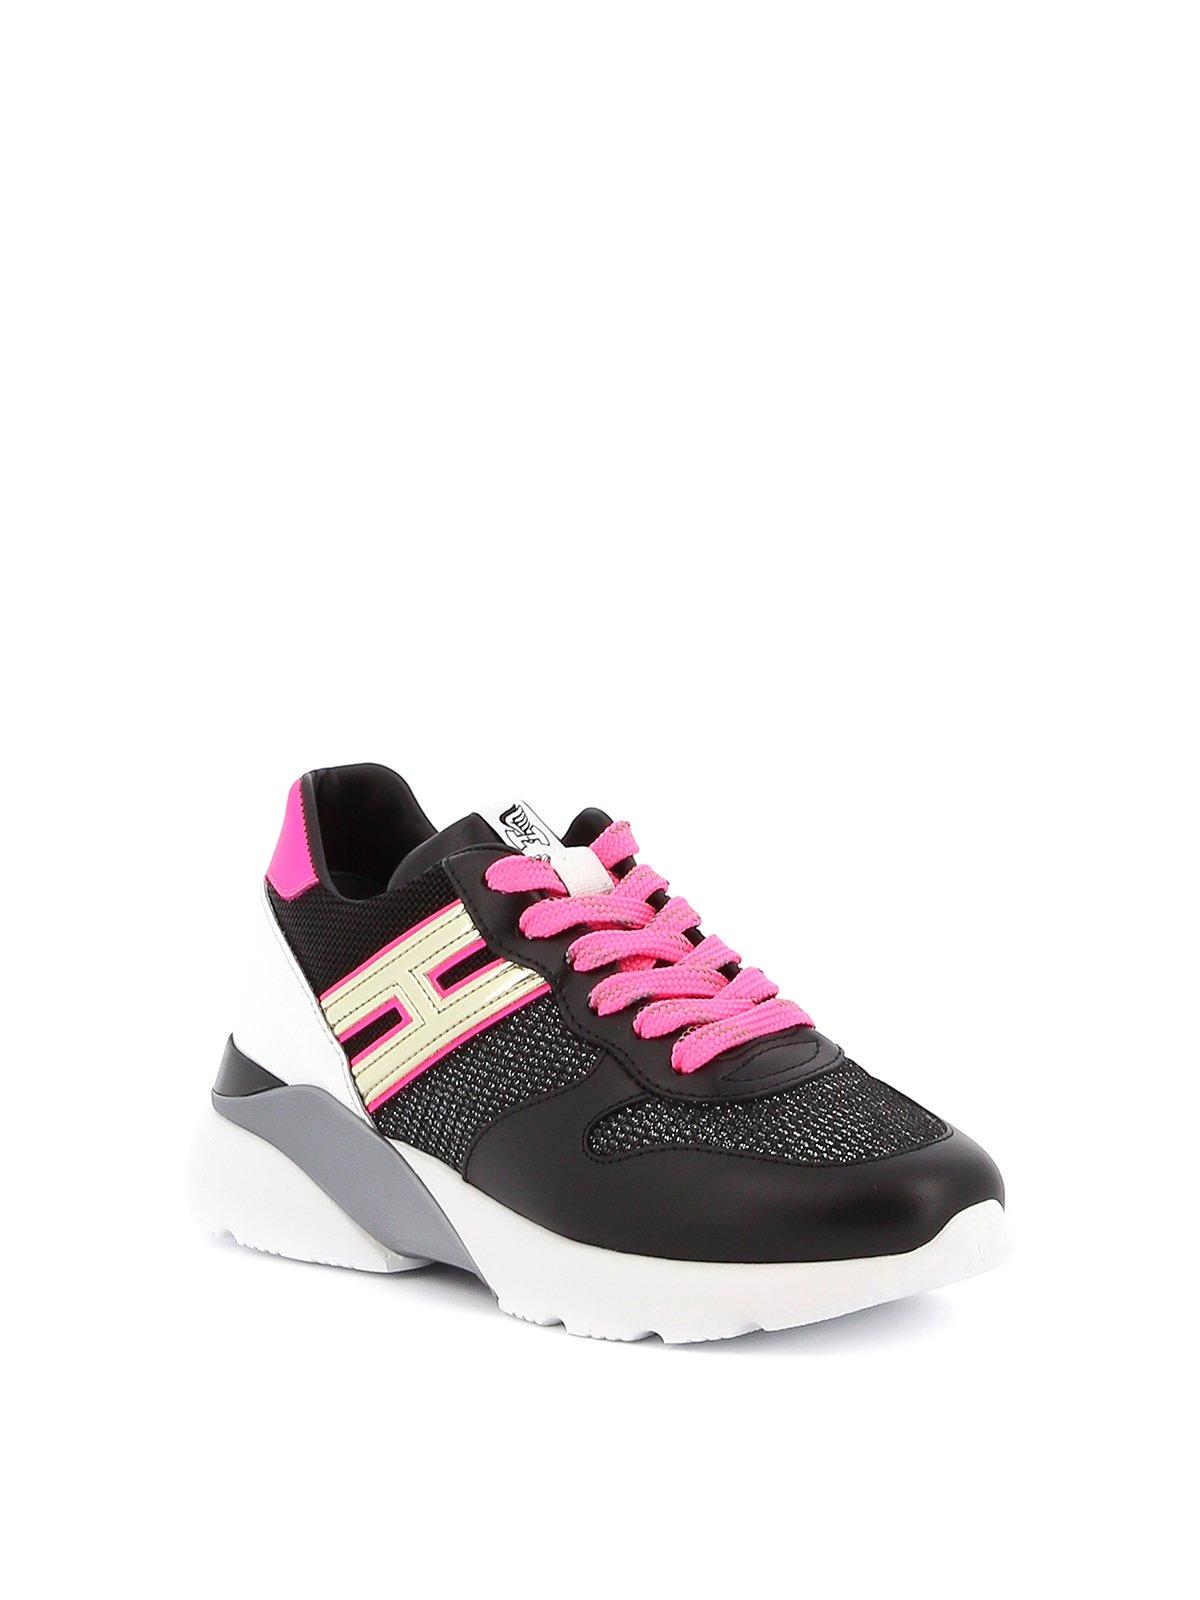 Hogan Leather Active One Sneakers - Lyst